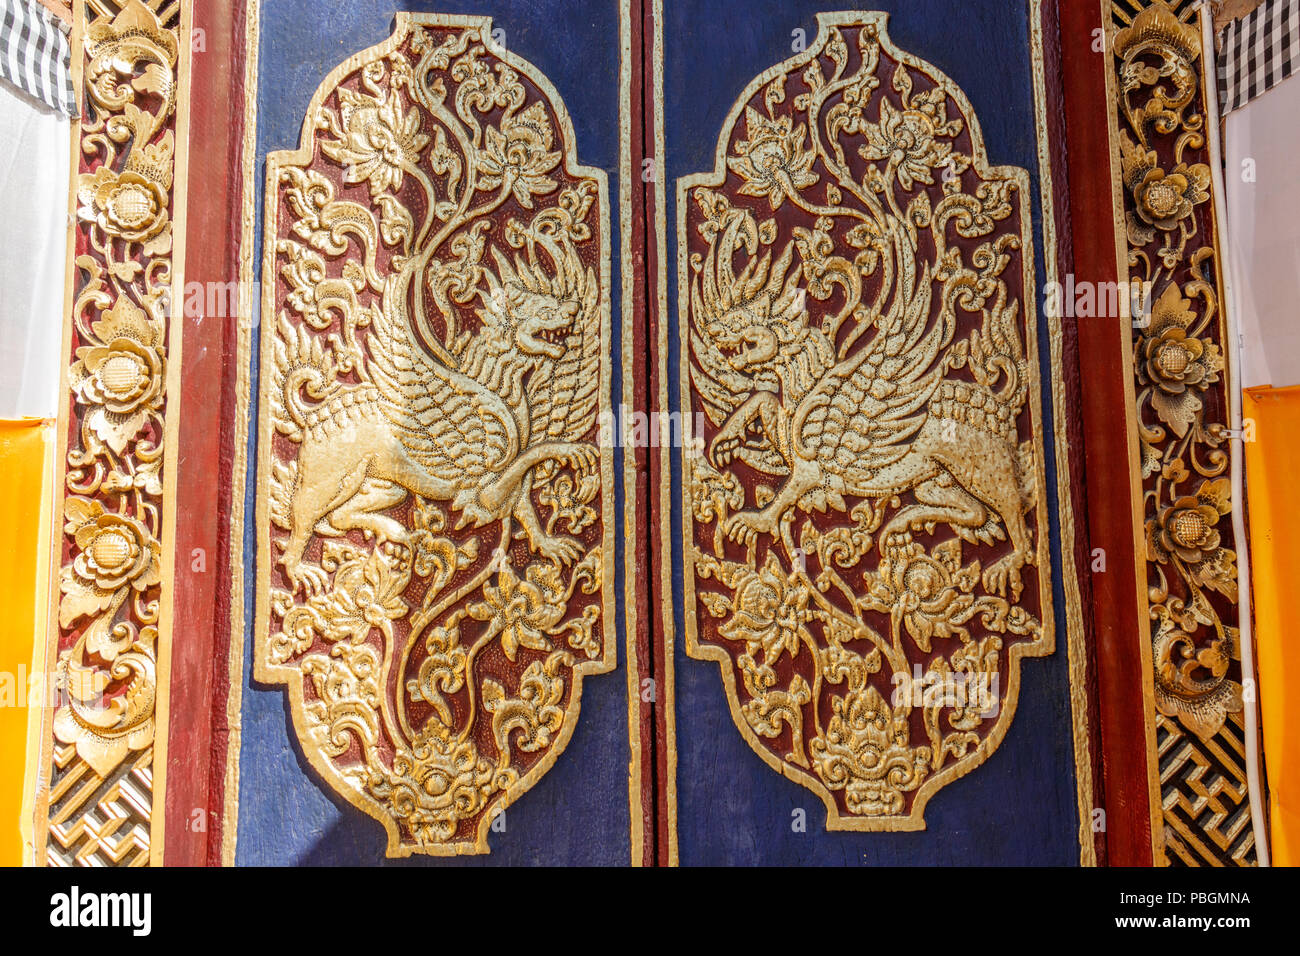 Carved wooden doors of the entrance gates of Hindu Balinese  temple, Buruan, Bali, Indonesia. Stock Photo